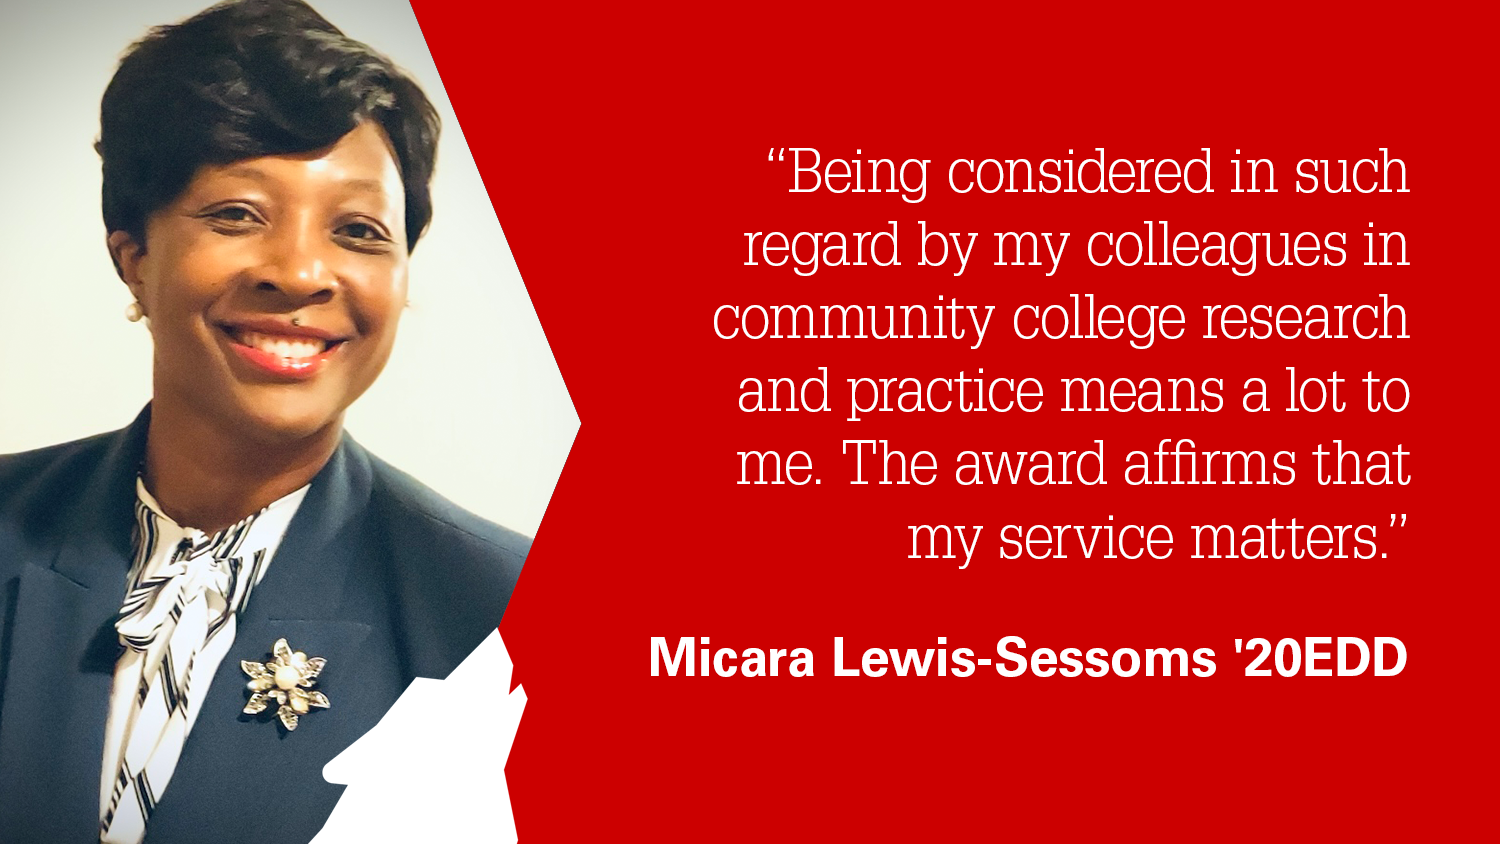 Micara Lewis-Sessoms with quote: Being considered in such regard by my colleagues in community college research and practice means a lot to me. The award affirms that my service matters.